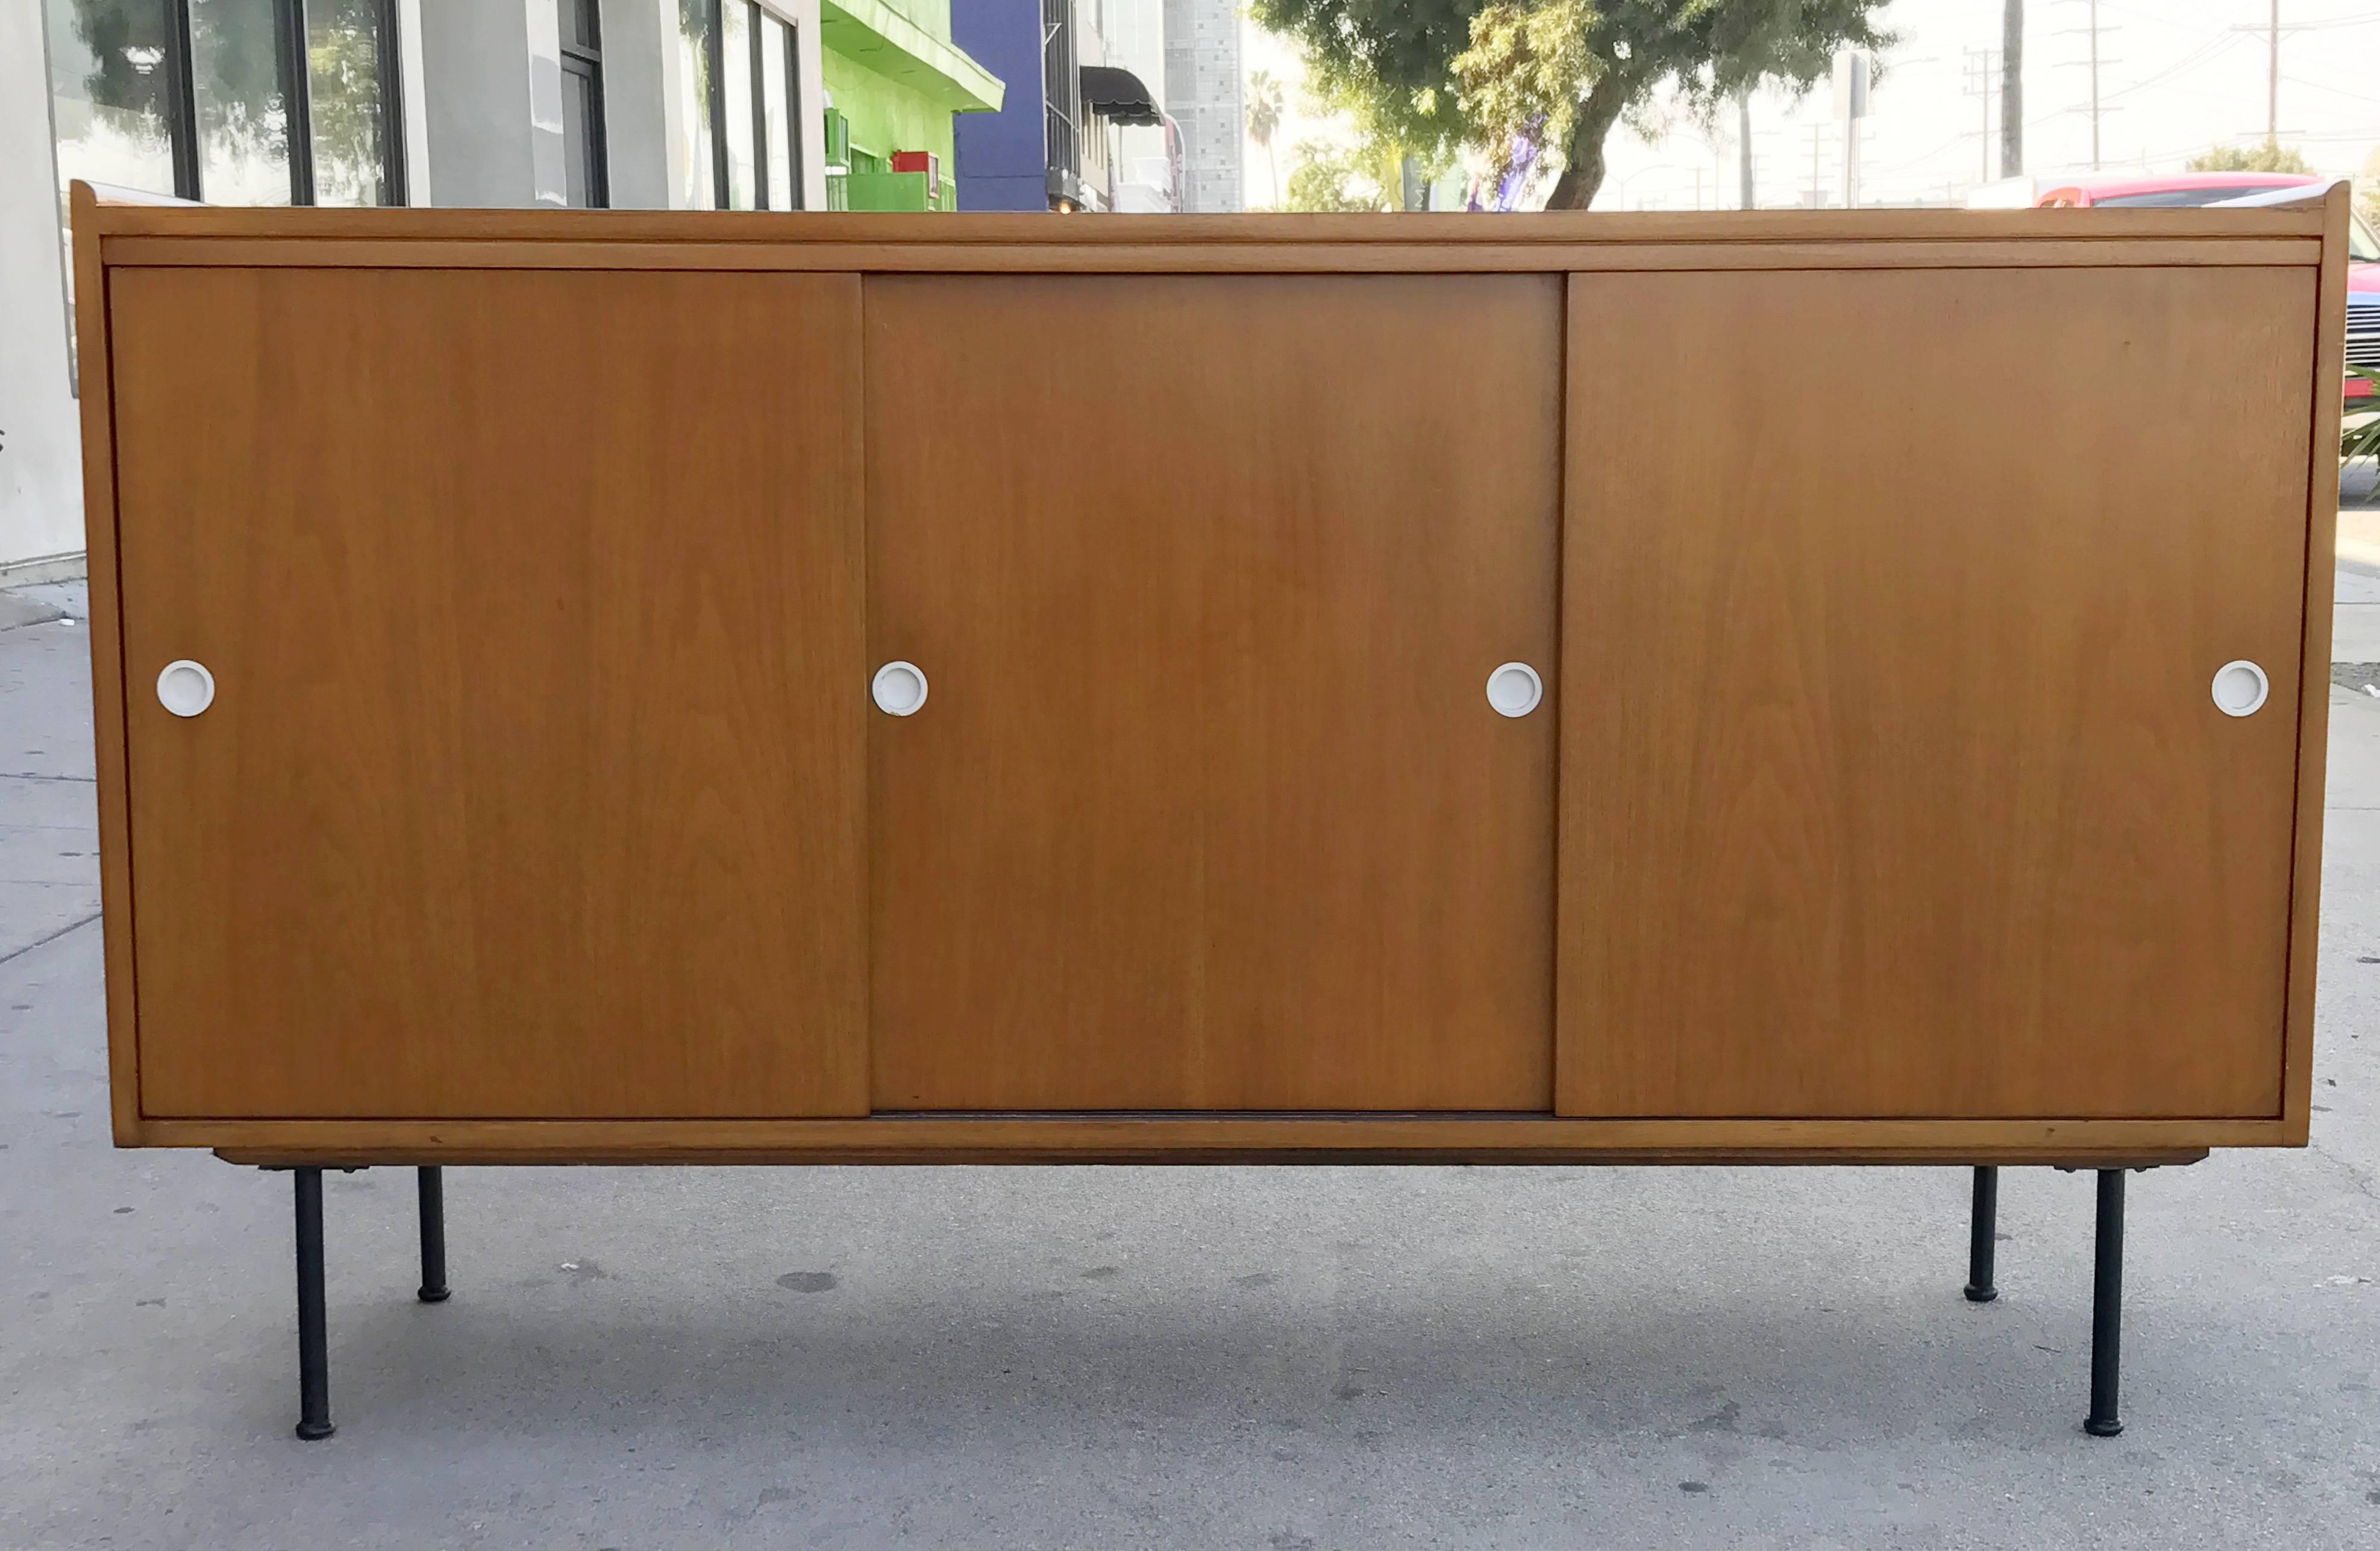 A sliding door credenza in the manner of American designer Paul McCobb. Walnut wood with blackened steel legs and white hardware. One section of the piece holds three drawers, the other a shelf.